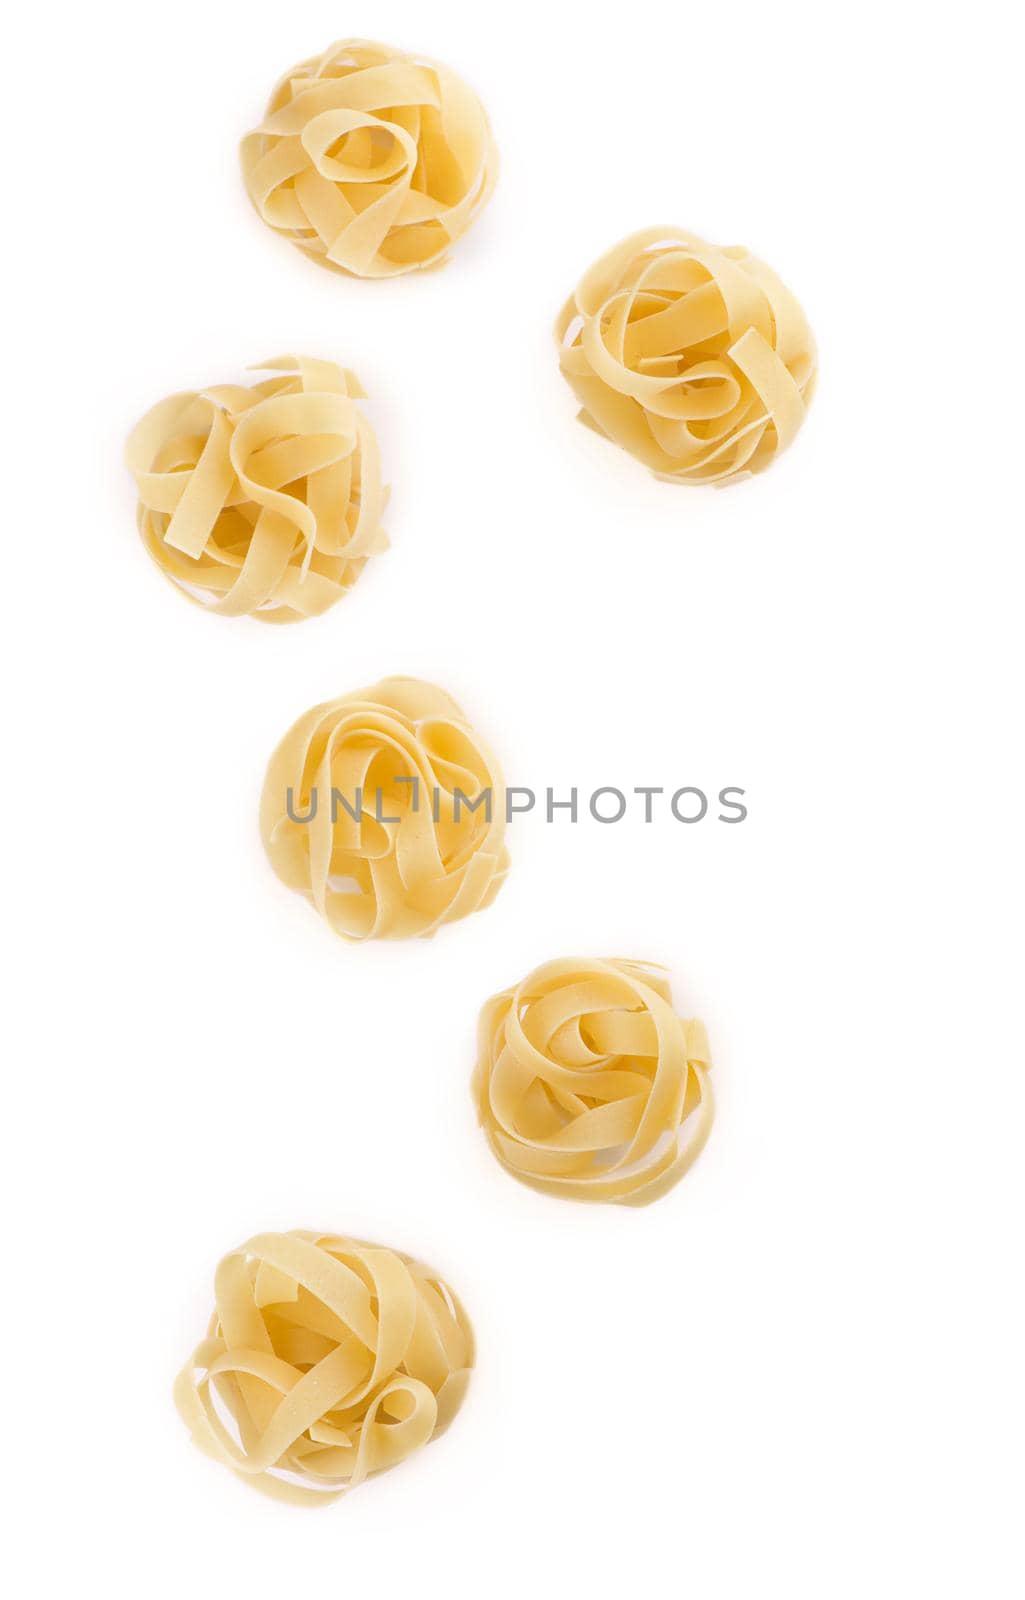 Spaghetti and basil isolated on white background. by aprilphoto